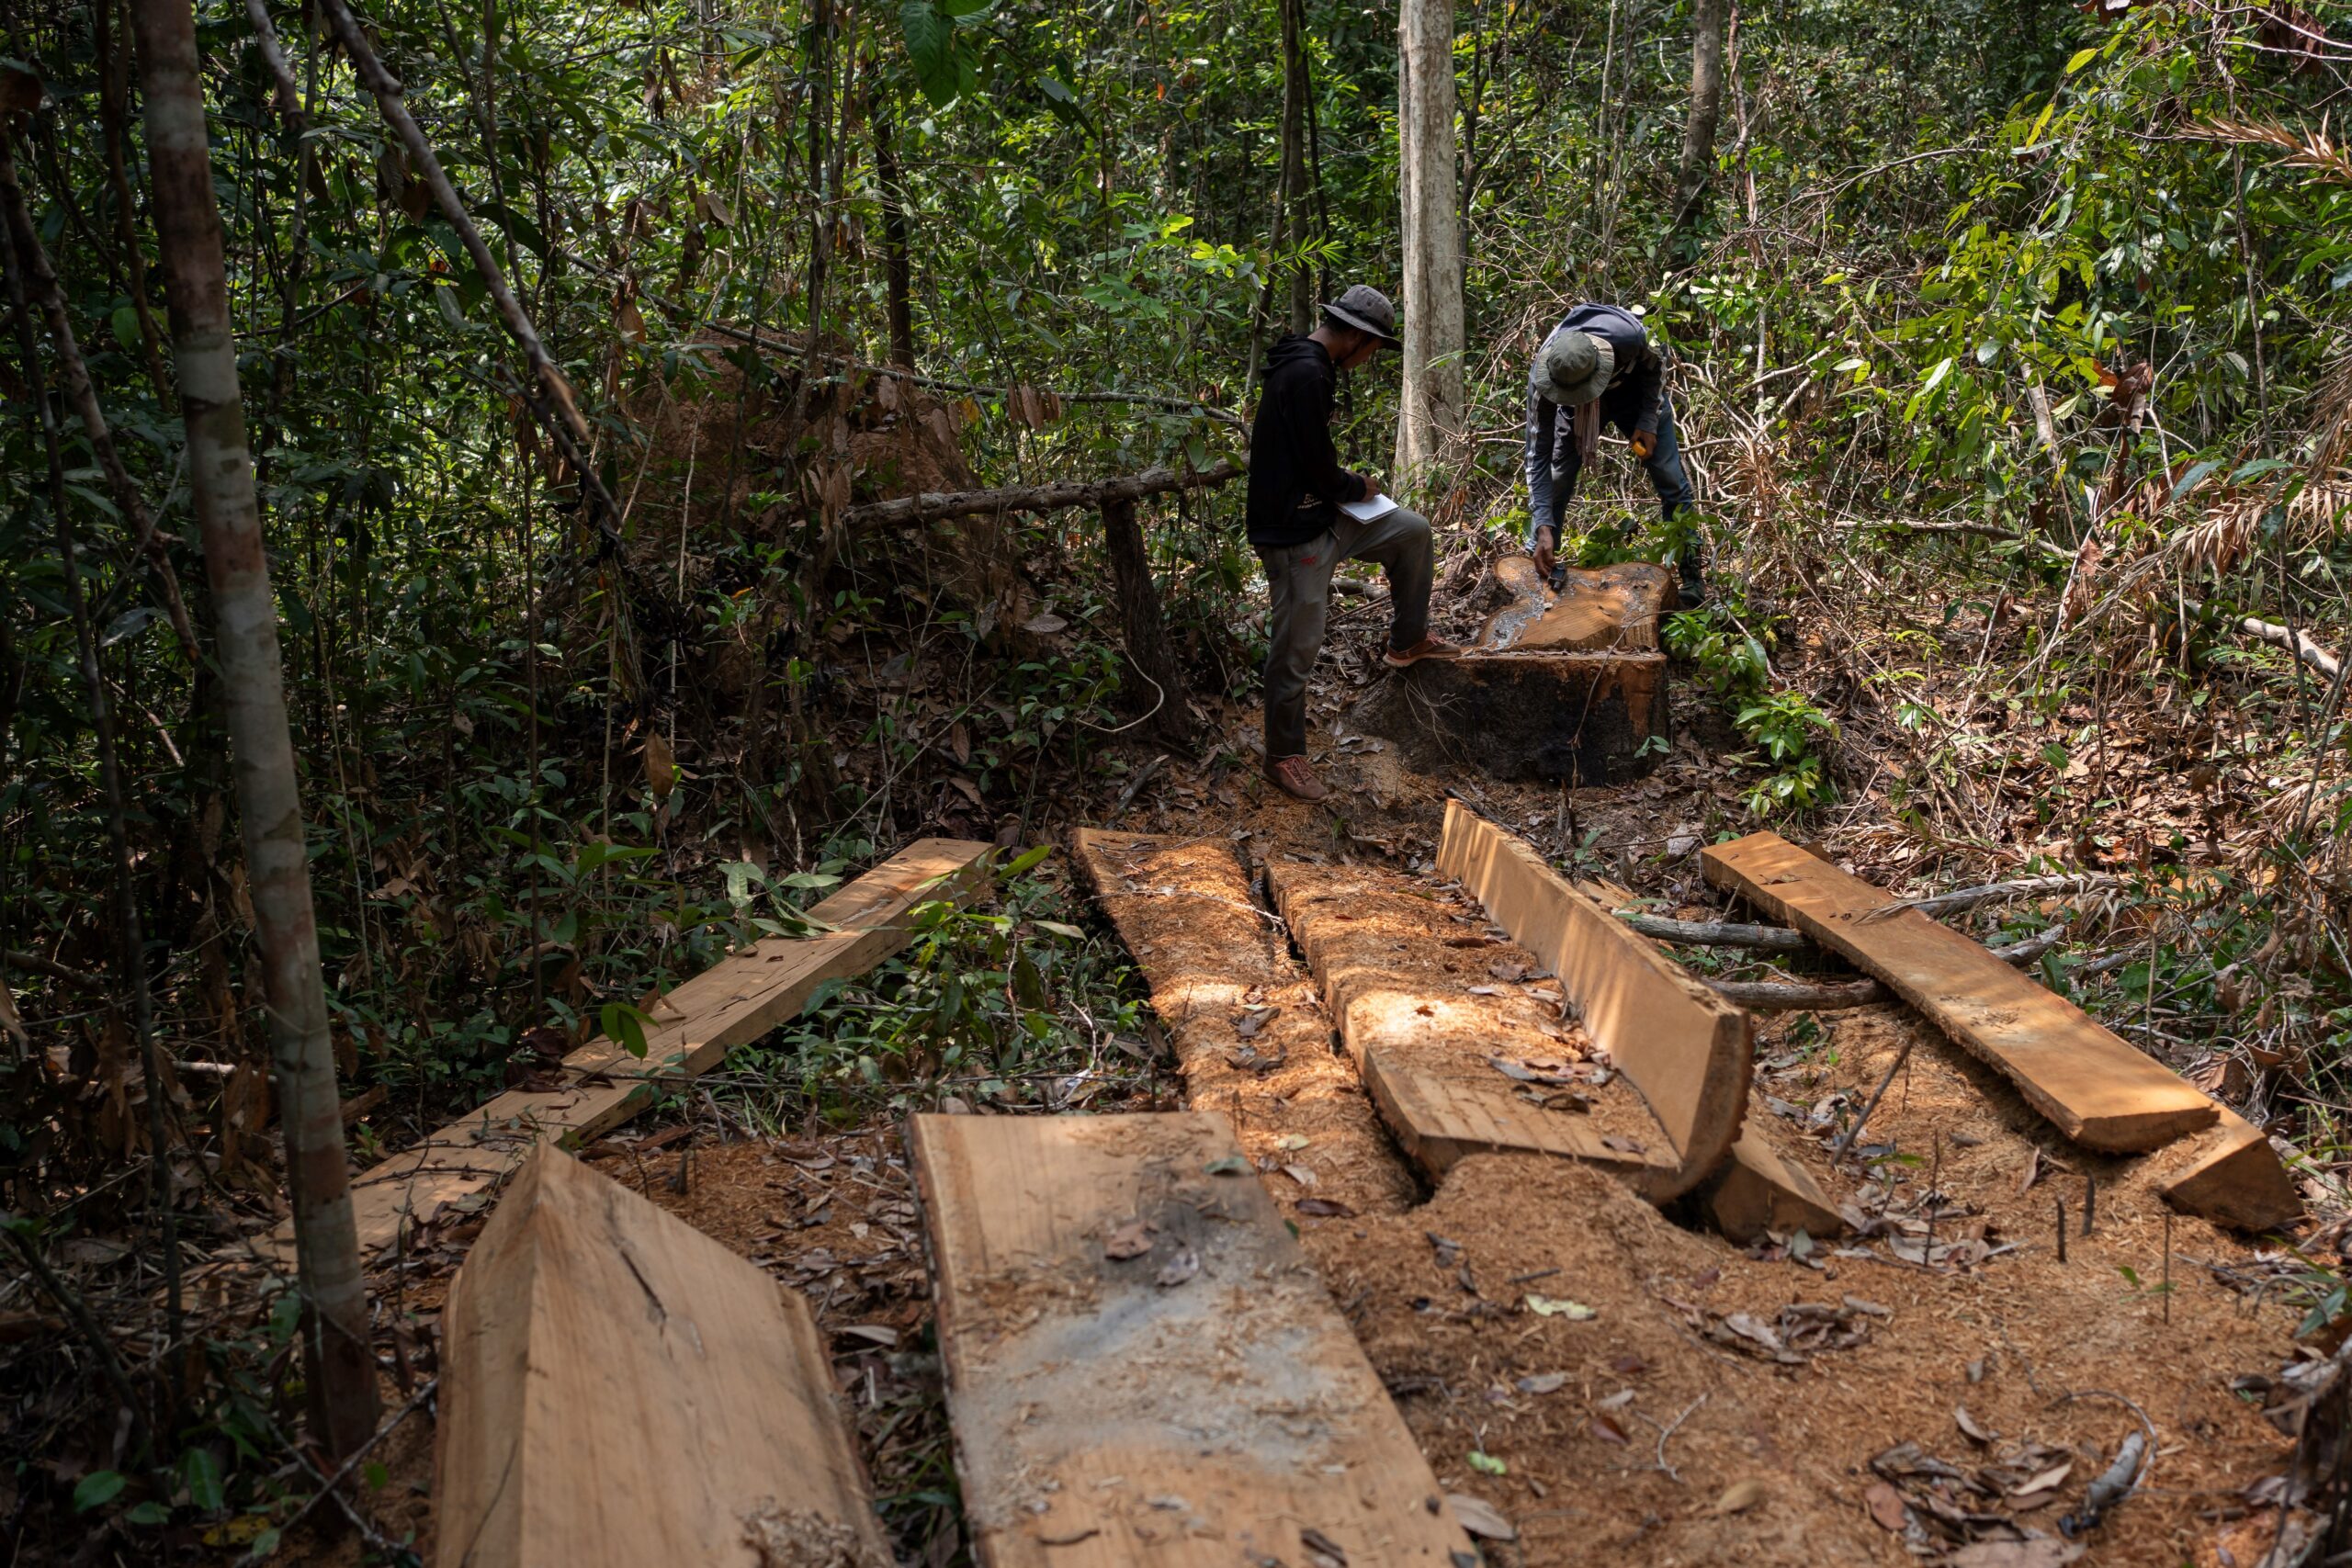 Loggers carve out the valuable center of the trees. The cuboid sawn logs taken are easier to stack and transport than round logs, but the process creates a lot of waste. Image by Andy Ball / Mongabay.